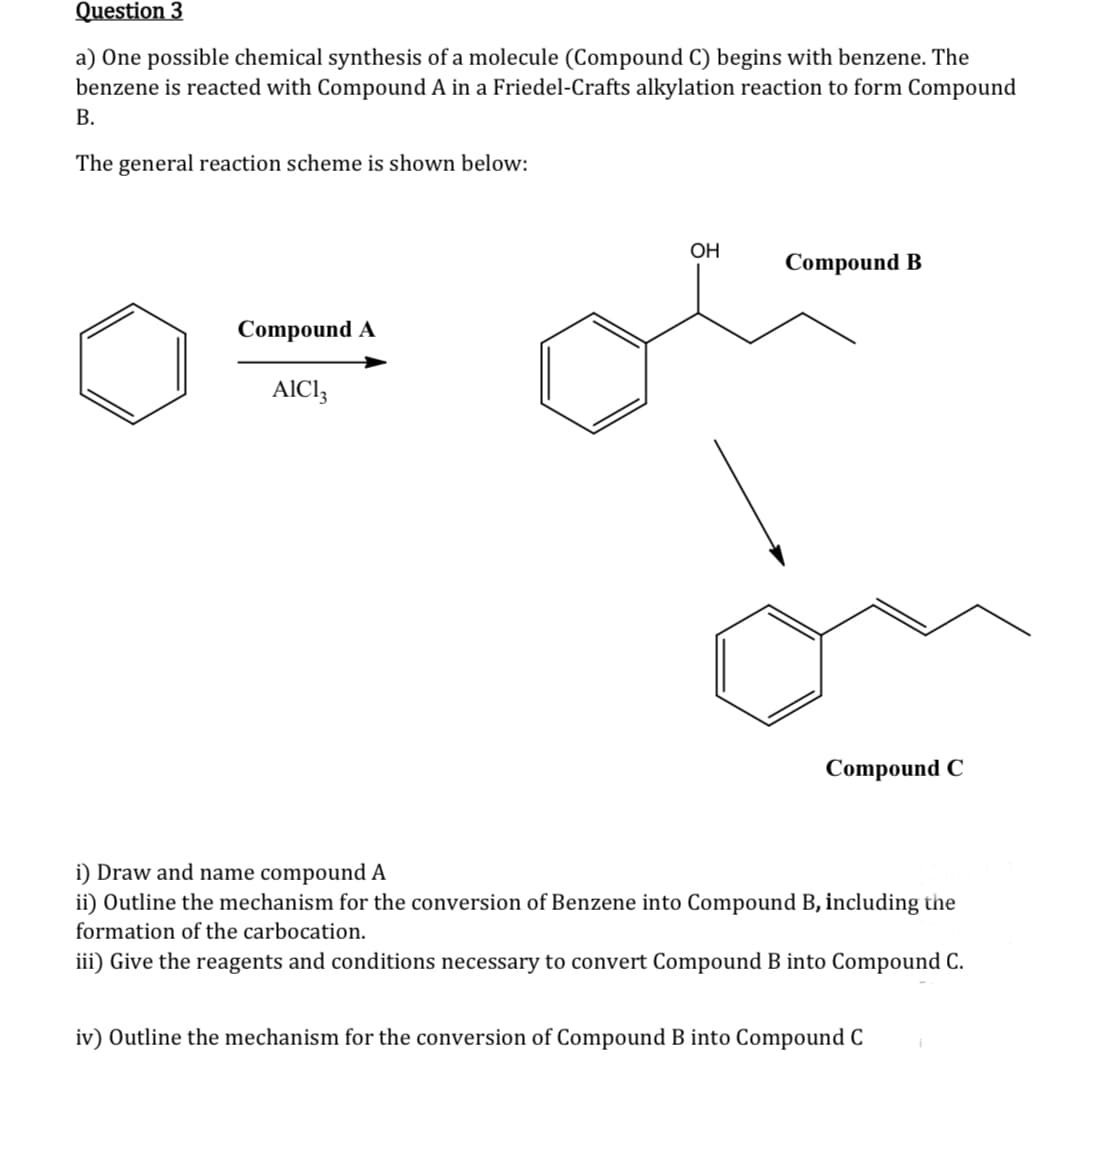 Question 3
a) One possible chemical synthesis of a molecule (Compound C) begins with benzene. The
benzene is reacted with Compound A in a Friedel-Crafts alkylation reaction to form Compound
B.
The general reaction scheme is shown below:
Compound A
AIC13
OH
Compound B
Compound C
i) Draw and name compound A
ii) Outline the mechanism for the conversion of Benzene into Compound B, including the
formation of the carbocation.
iii) Give the reagents and conditions necessary to convert Compound B into Compound C.
iv) Outline the mechanism for the conversion of Compound B into Compound C